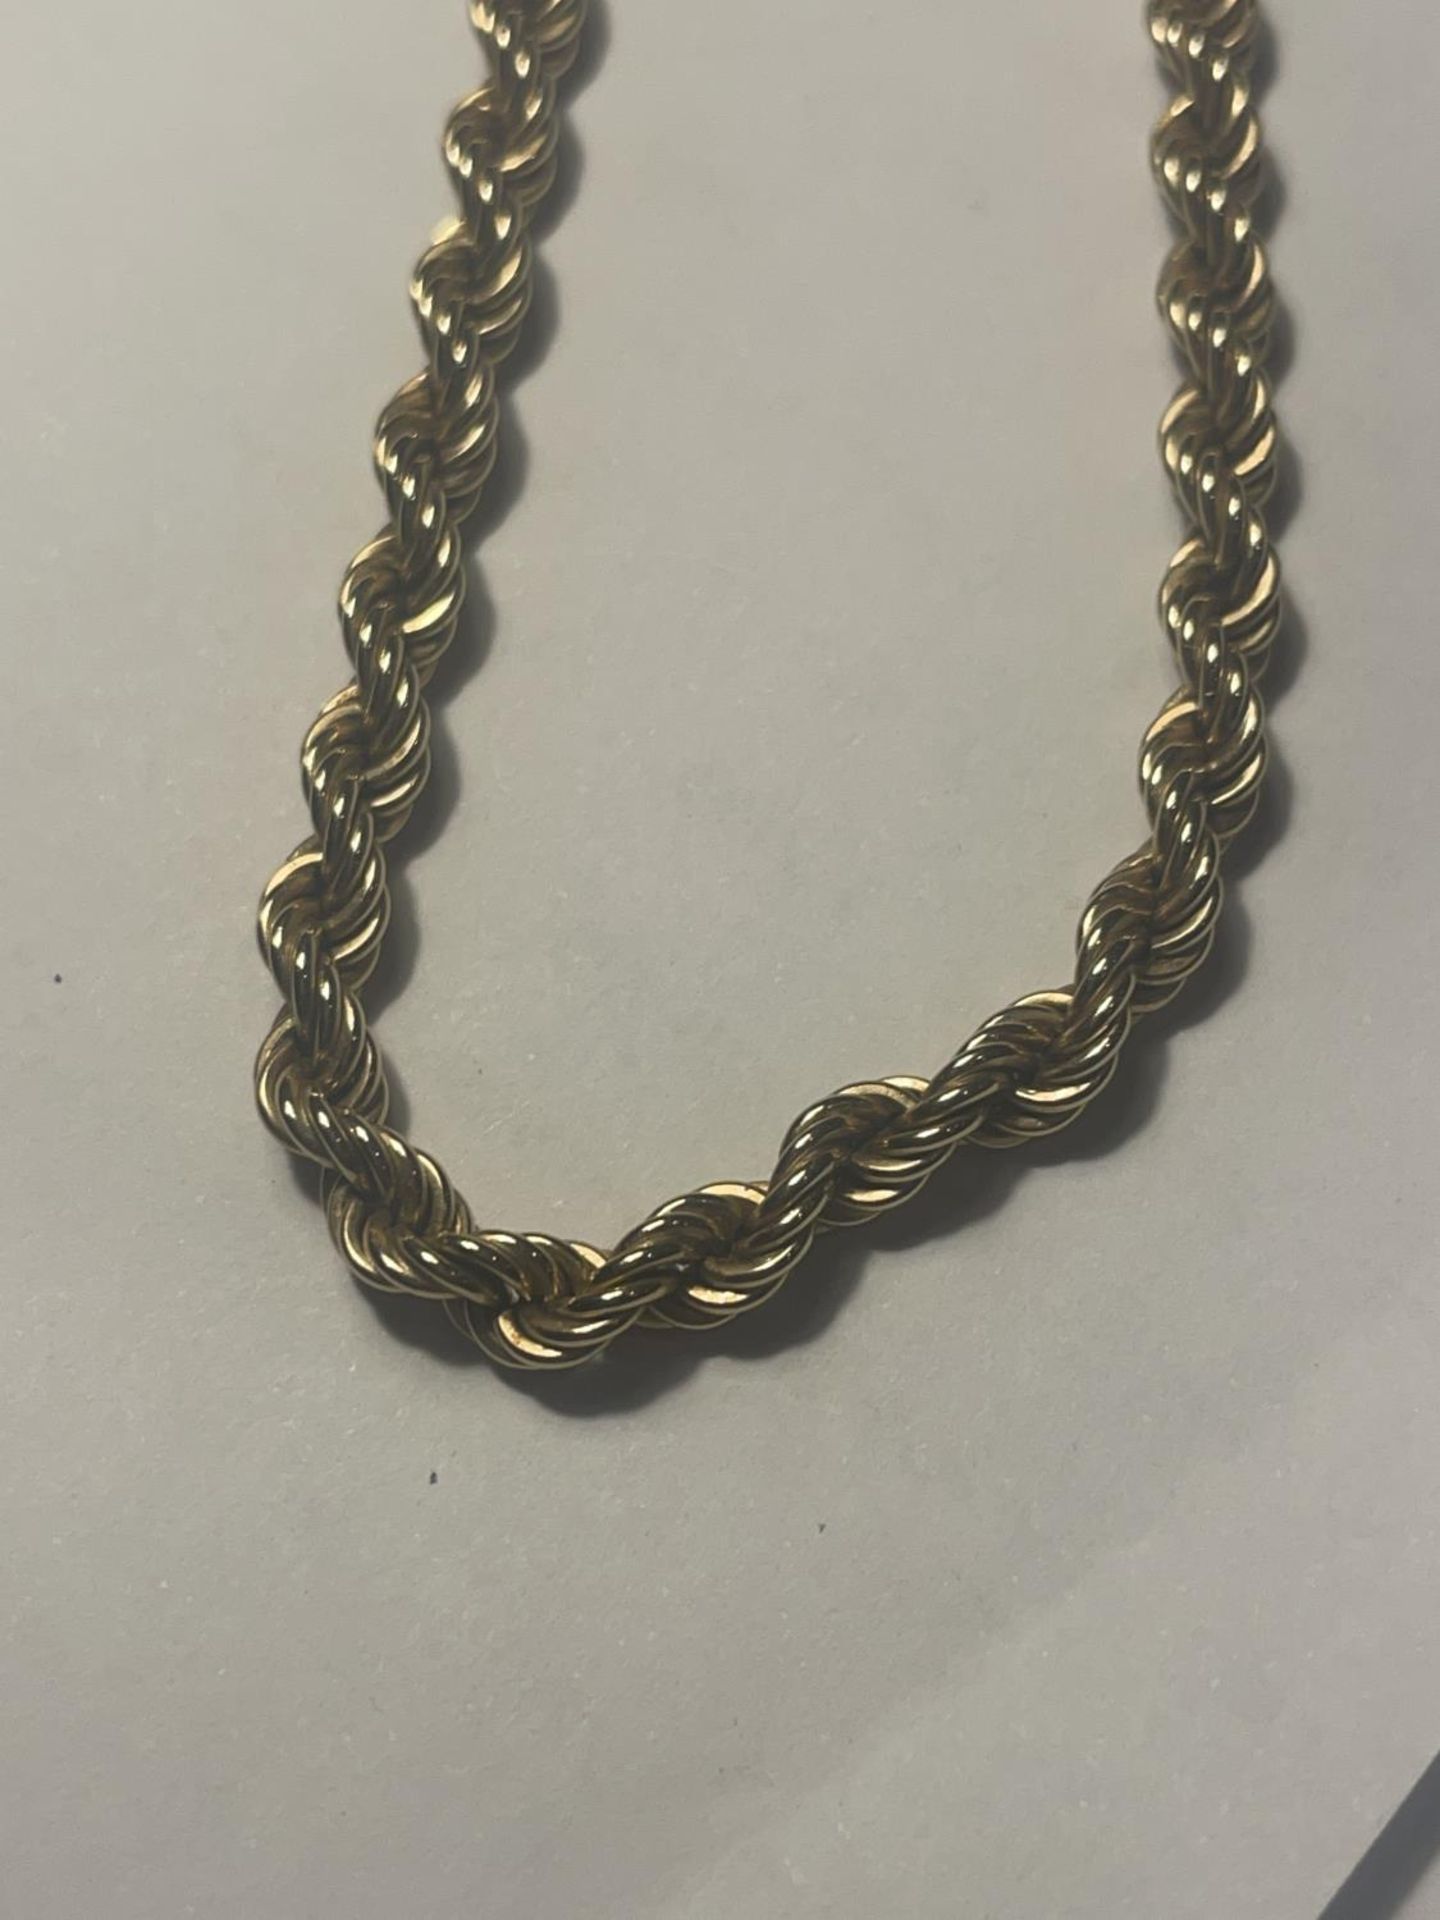 A 9 CARAT GOLD ROPE NECKLACE MARKED 375 (CLASP A/F) GROSS WEIGHT 9.7 GRAMS - Image 5 of 5